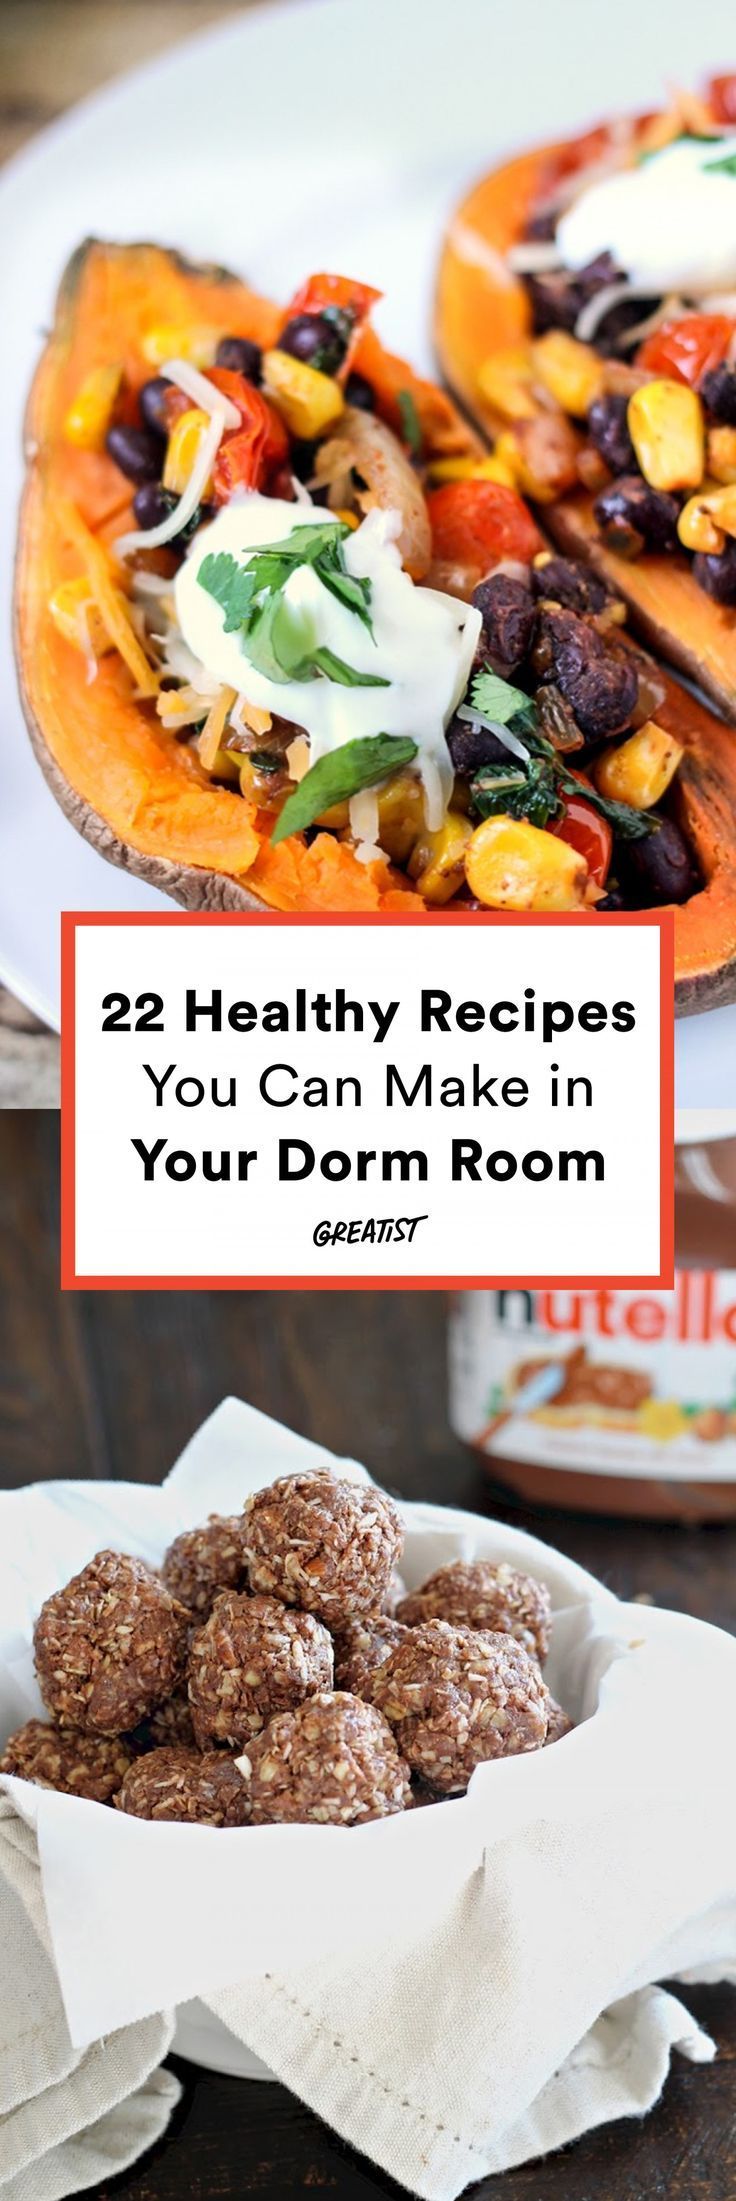 22 Healthy College Recipes You Can Make in Your Dorm Room -   16 healthy recipes For College Students schools ideas